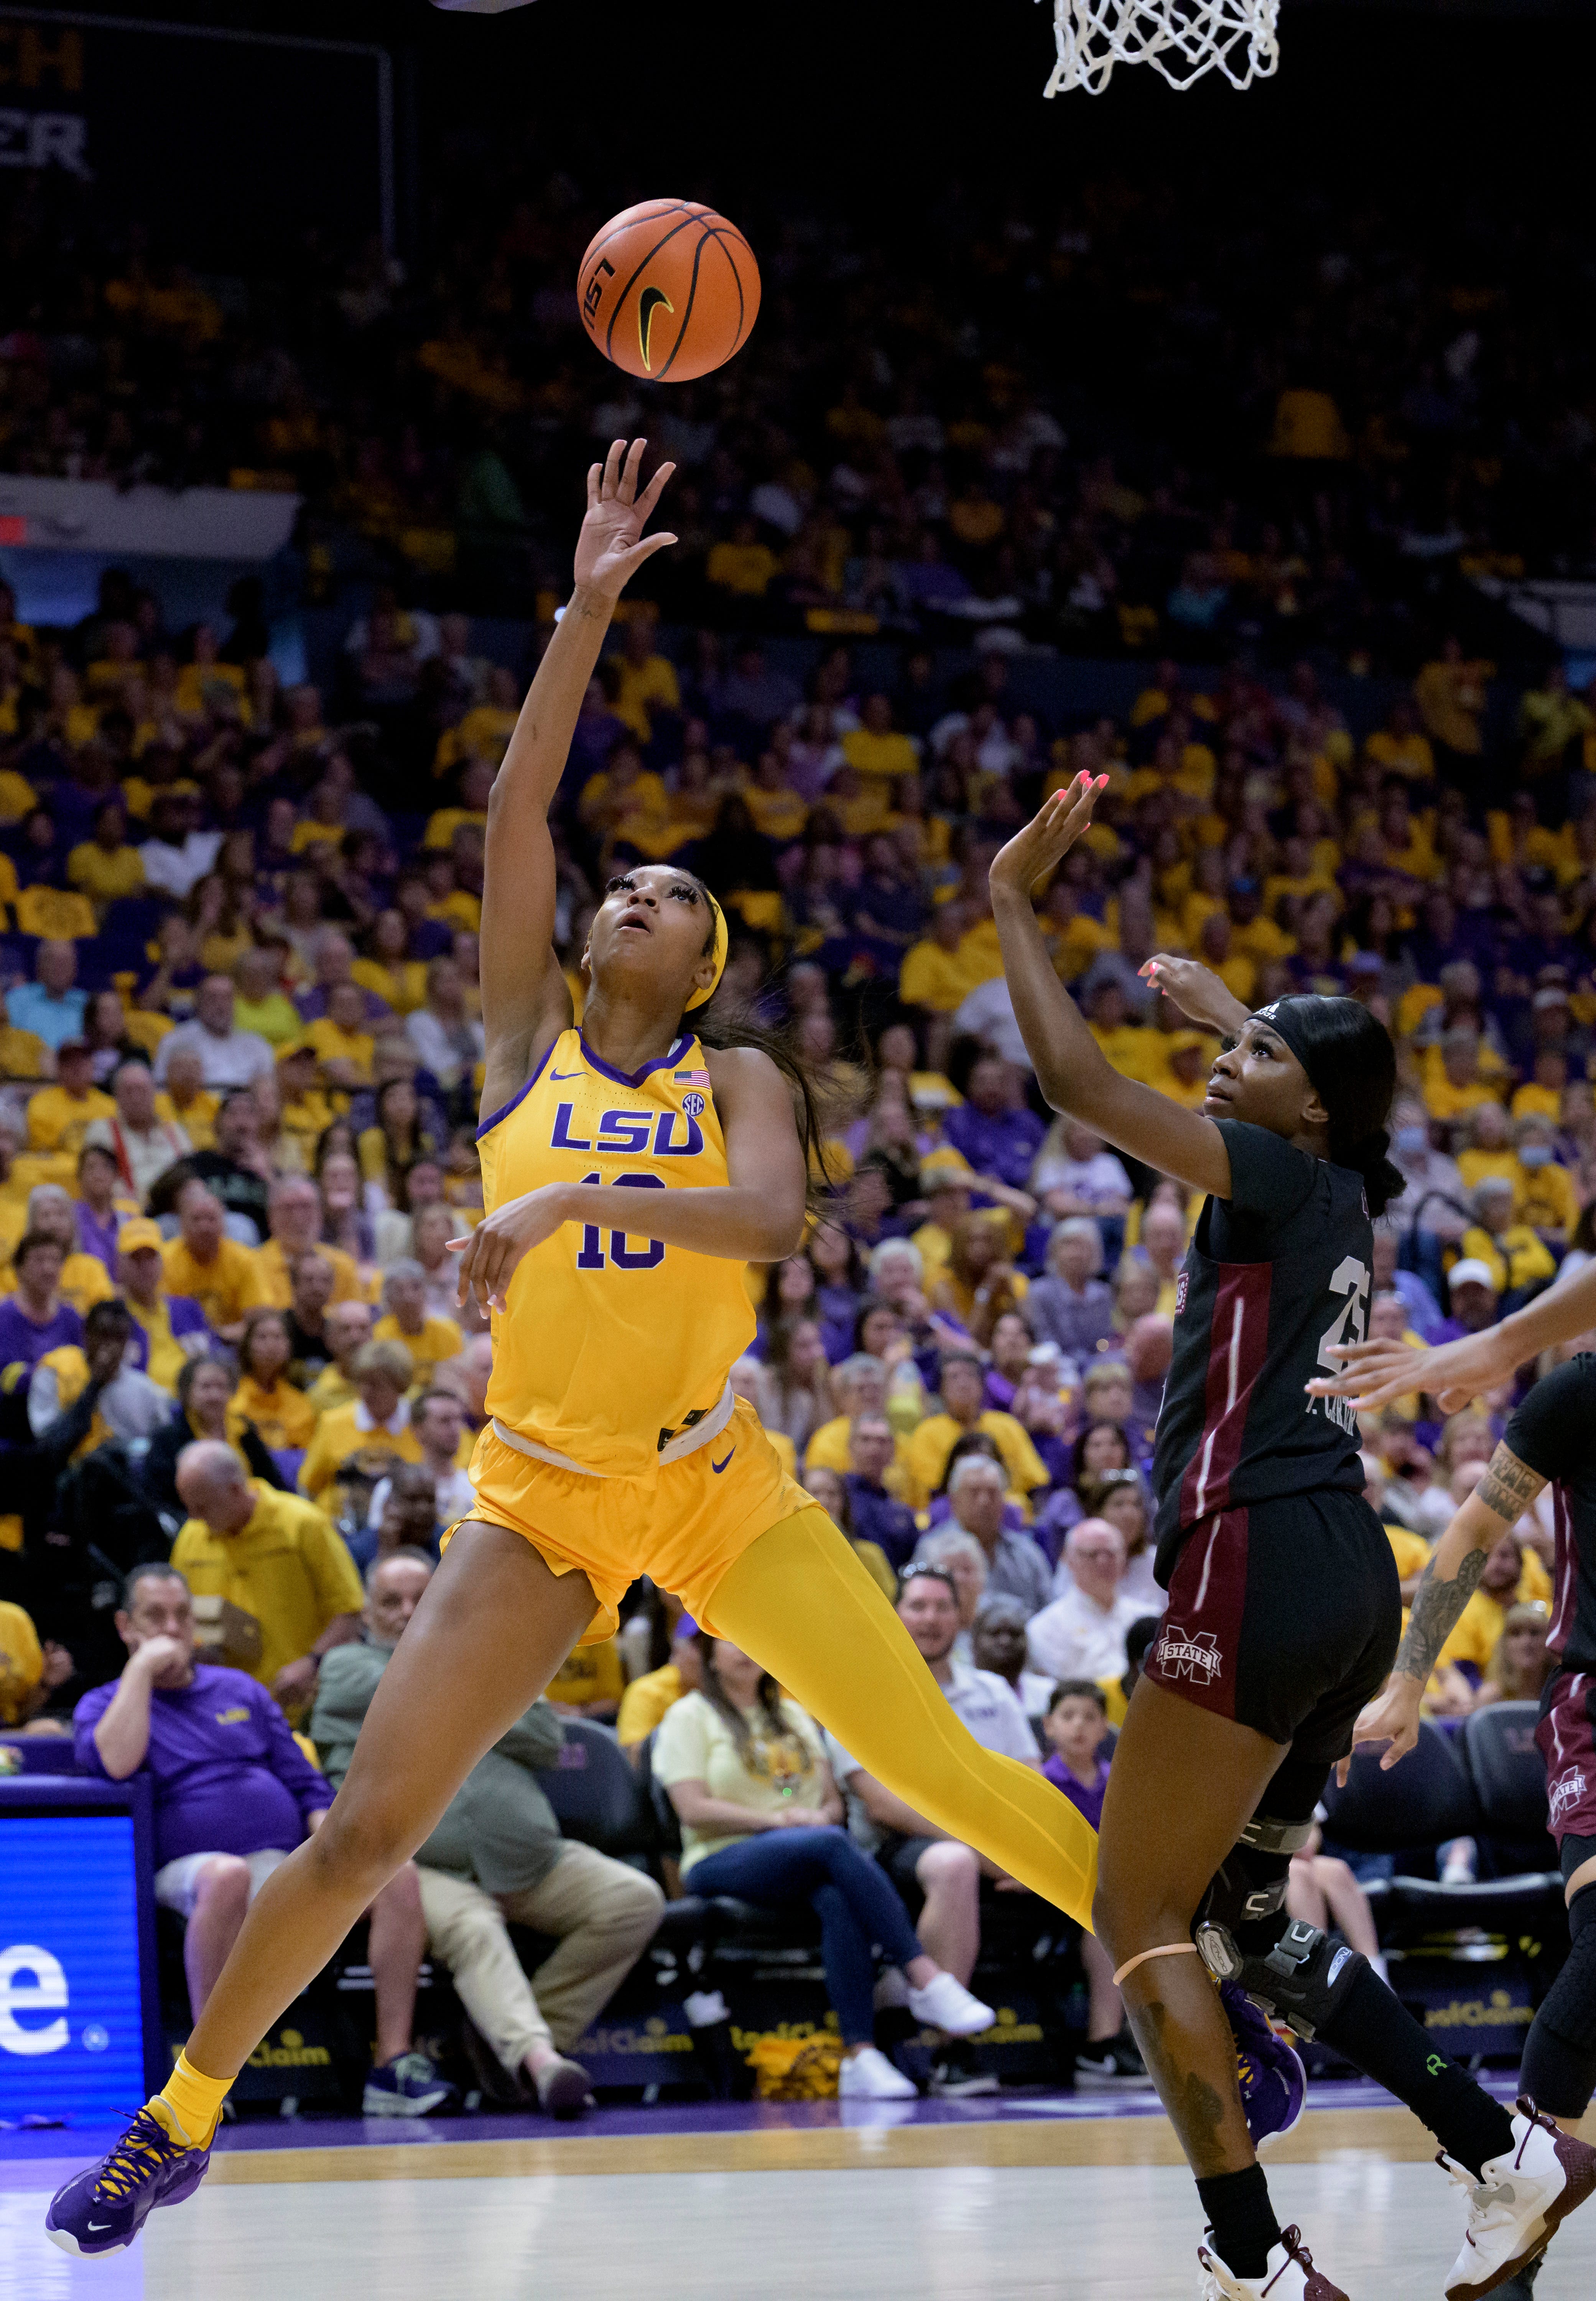 LSU forward Angel Reese (10) shoots against Mississippi State forward Denae Carter (25) in the first half of an NCAA basketball game Sunday, Feb. 26, 2023, in Baton Rouge, La. (AP Photo/Matthew Hinton)